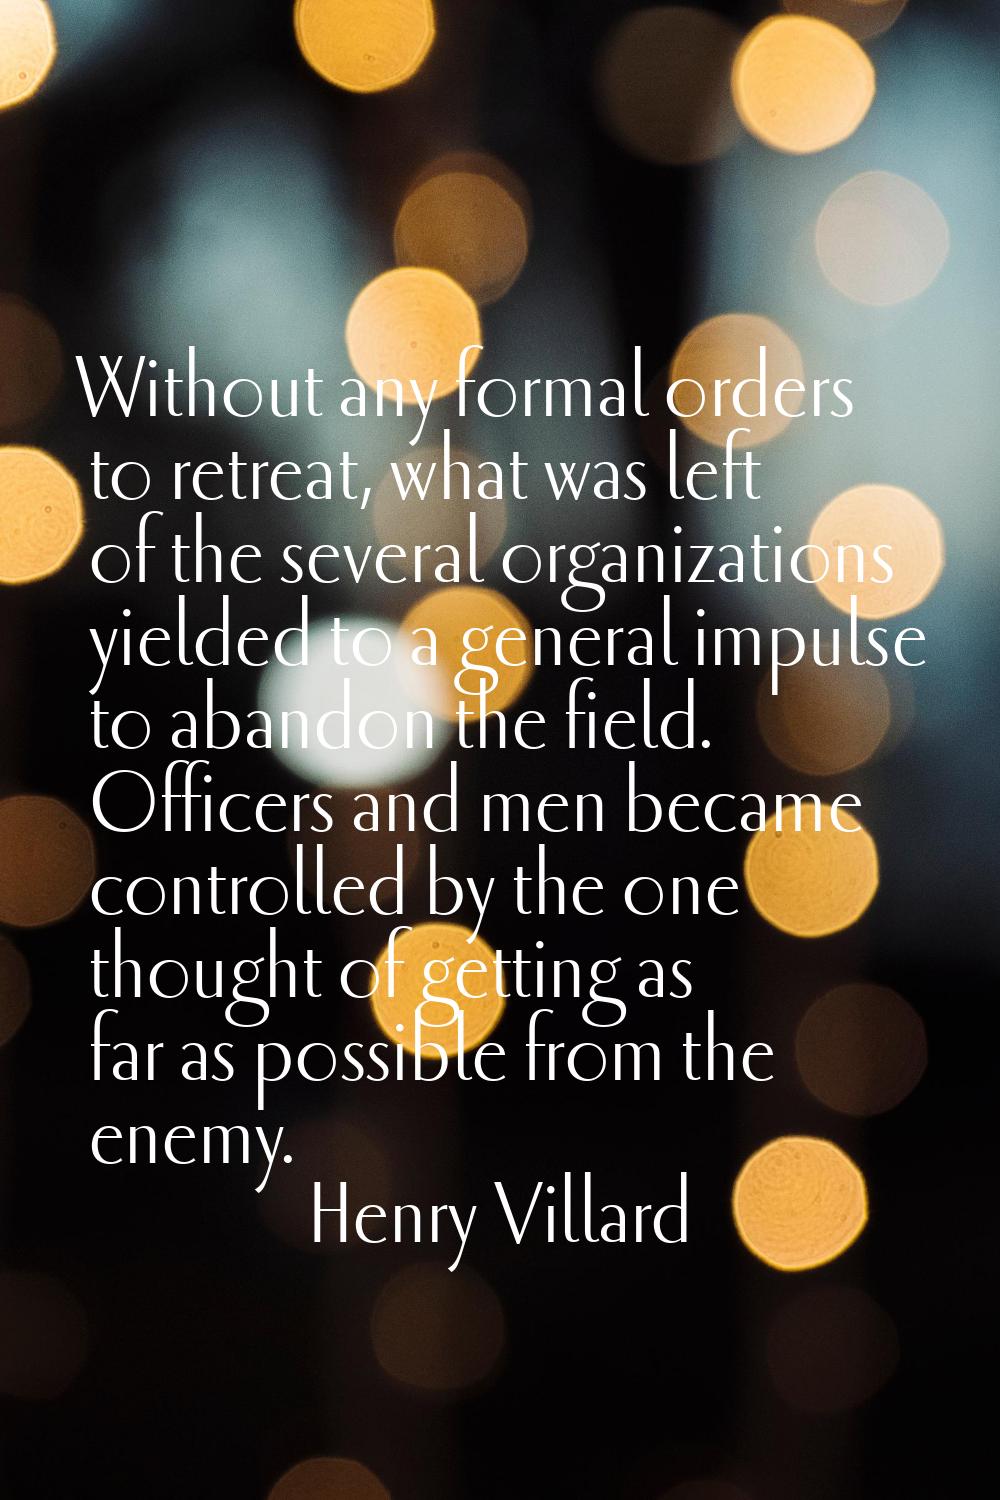 Without any formal orders to retreat, what was left of the several organizations yielded to a gener